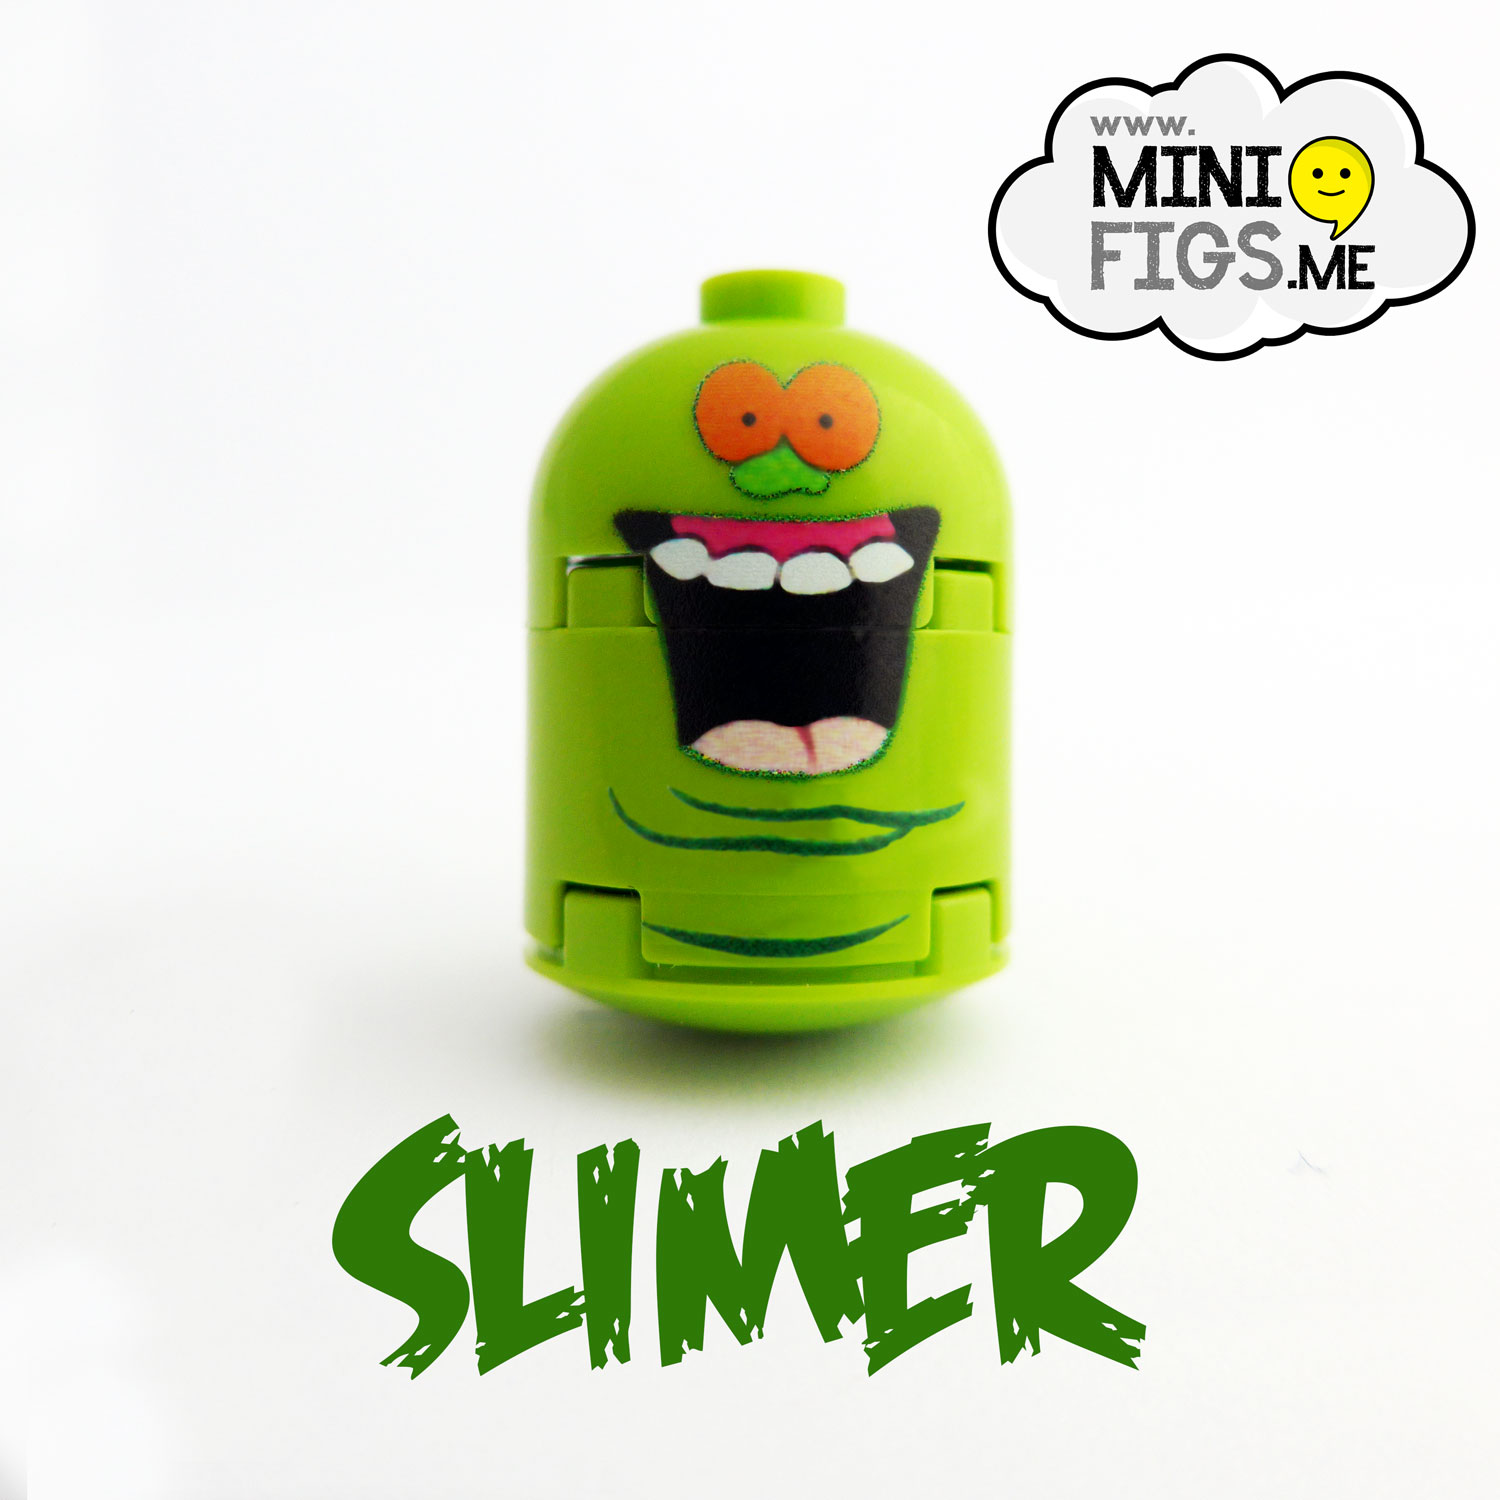 Slimer From Ghostbusters Images Crazy Gallery